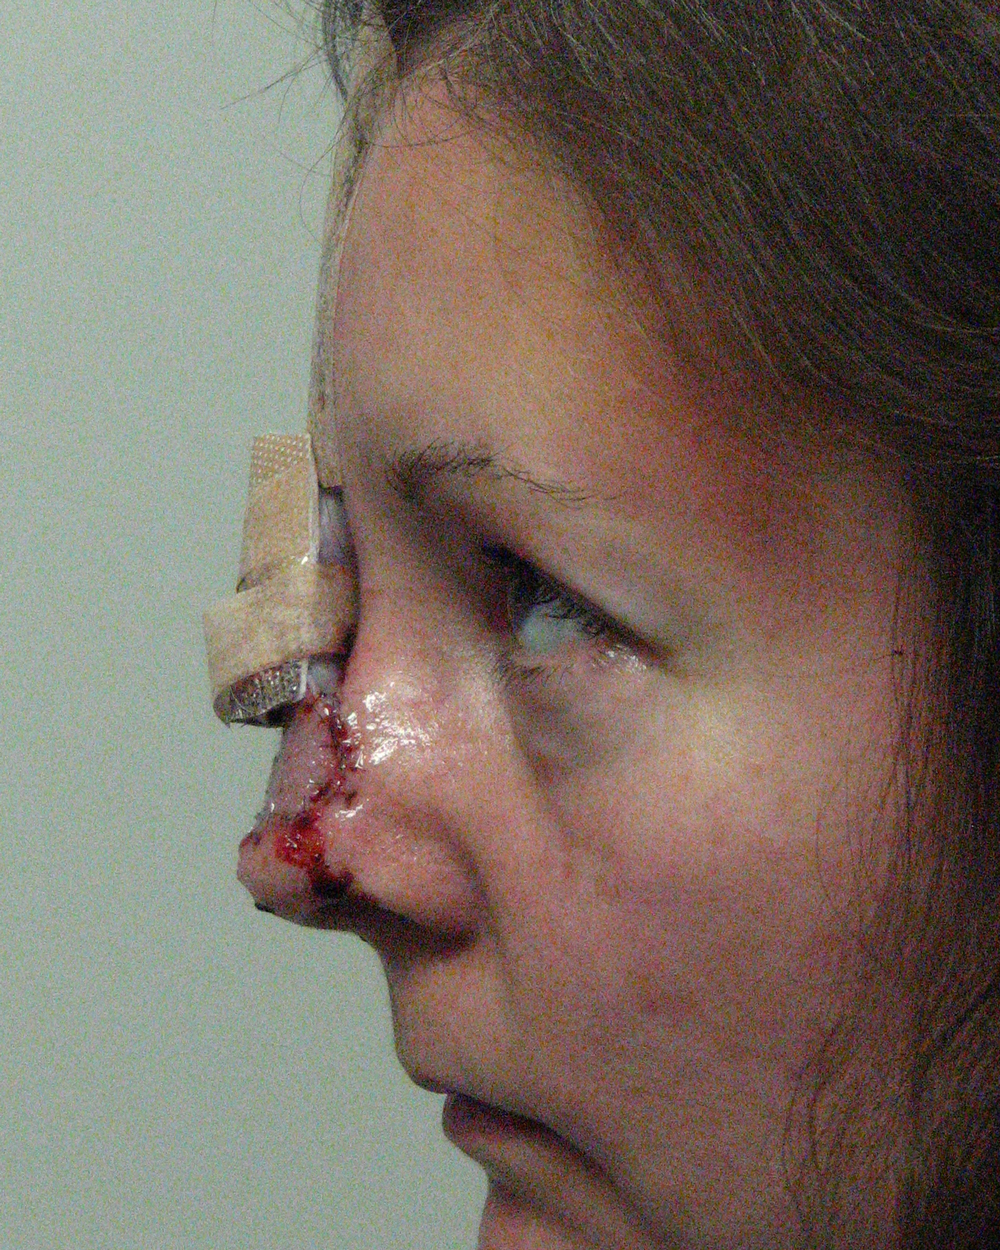 Stage One Surgery Post Op 1 Day Post Op Profile